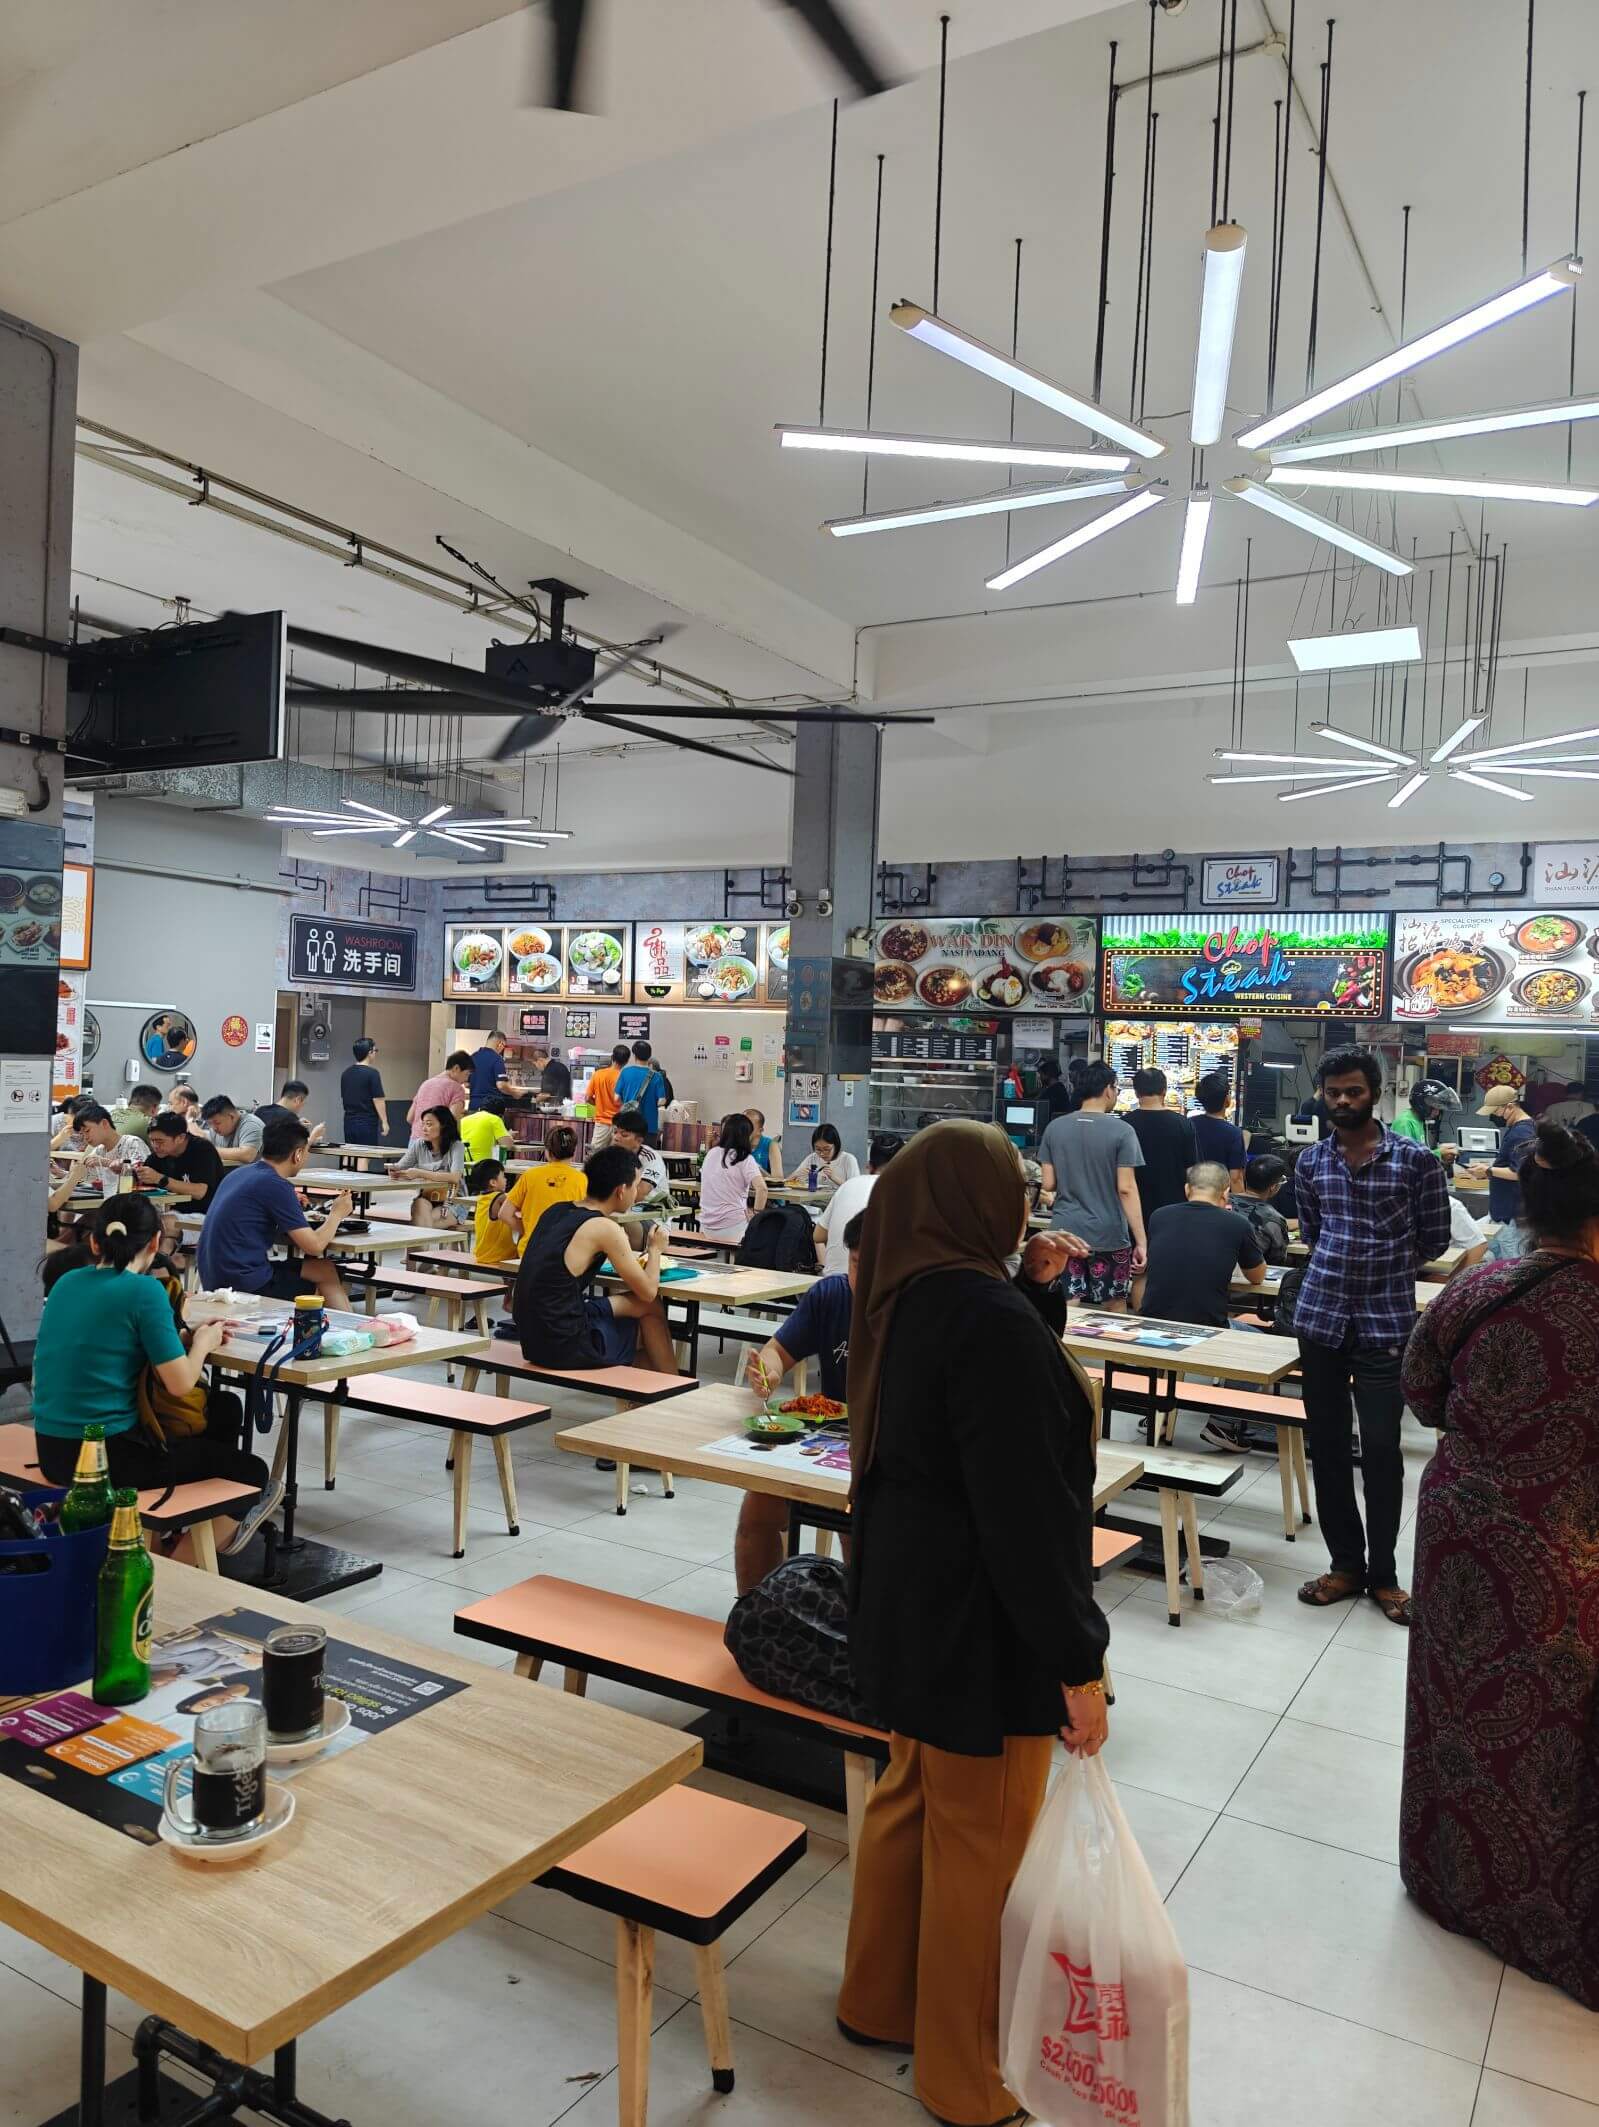 Woodlands Food Stall To Take Over